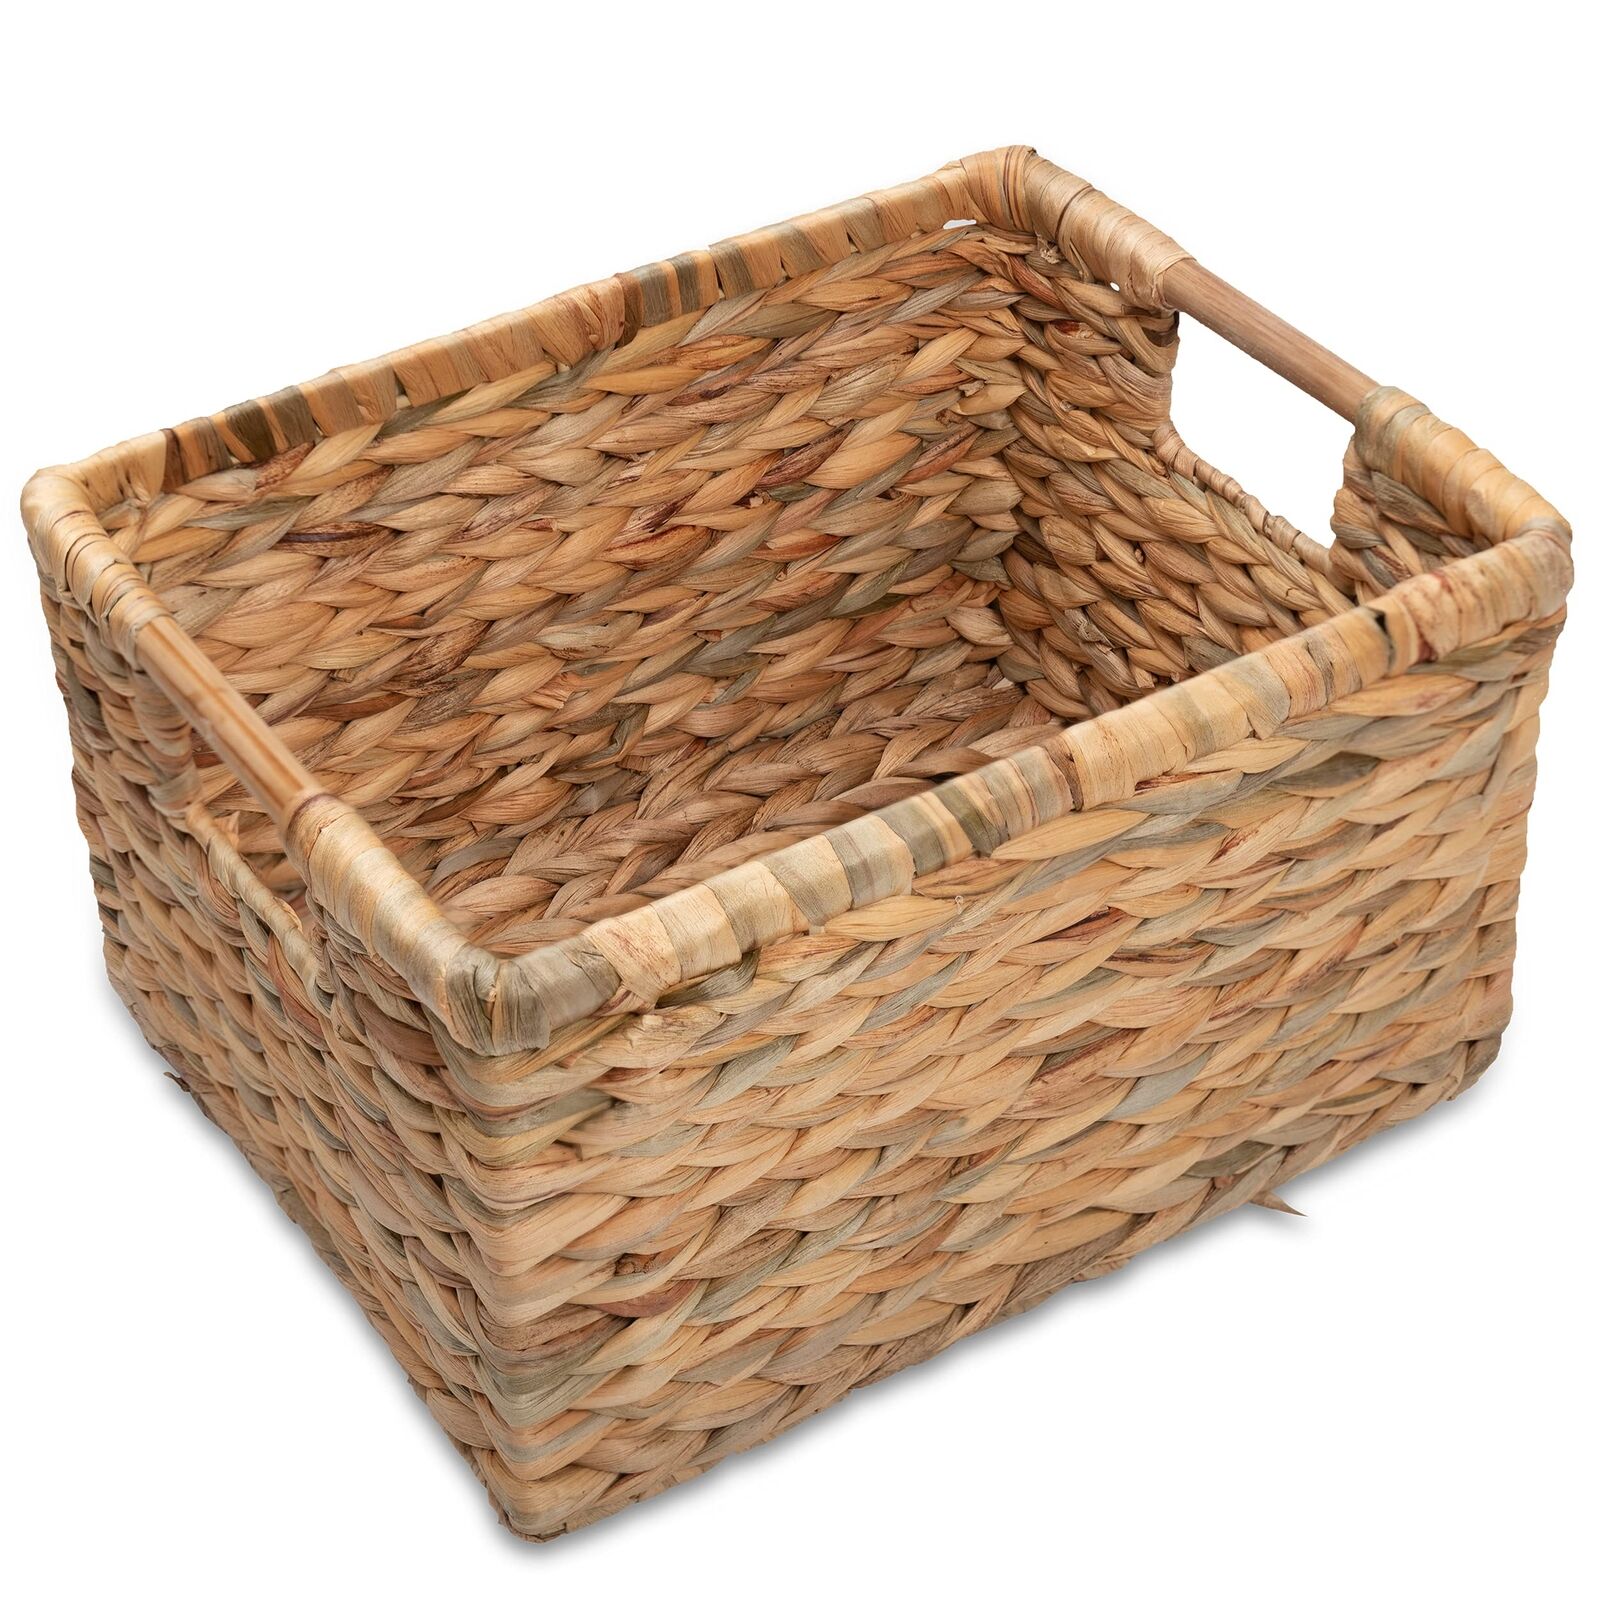 VATIMA Large Wicker Basket Rectangular with Wooden Handles for Shelves, Water Hy